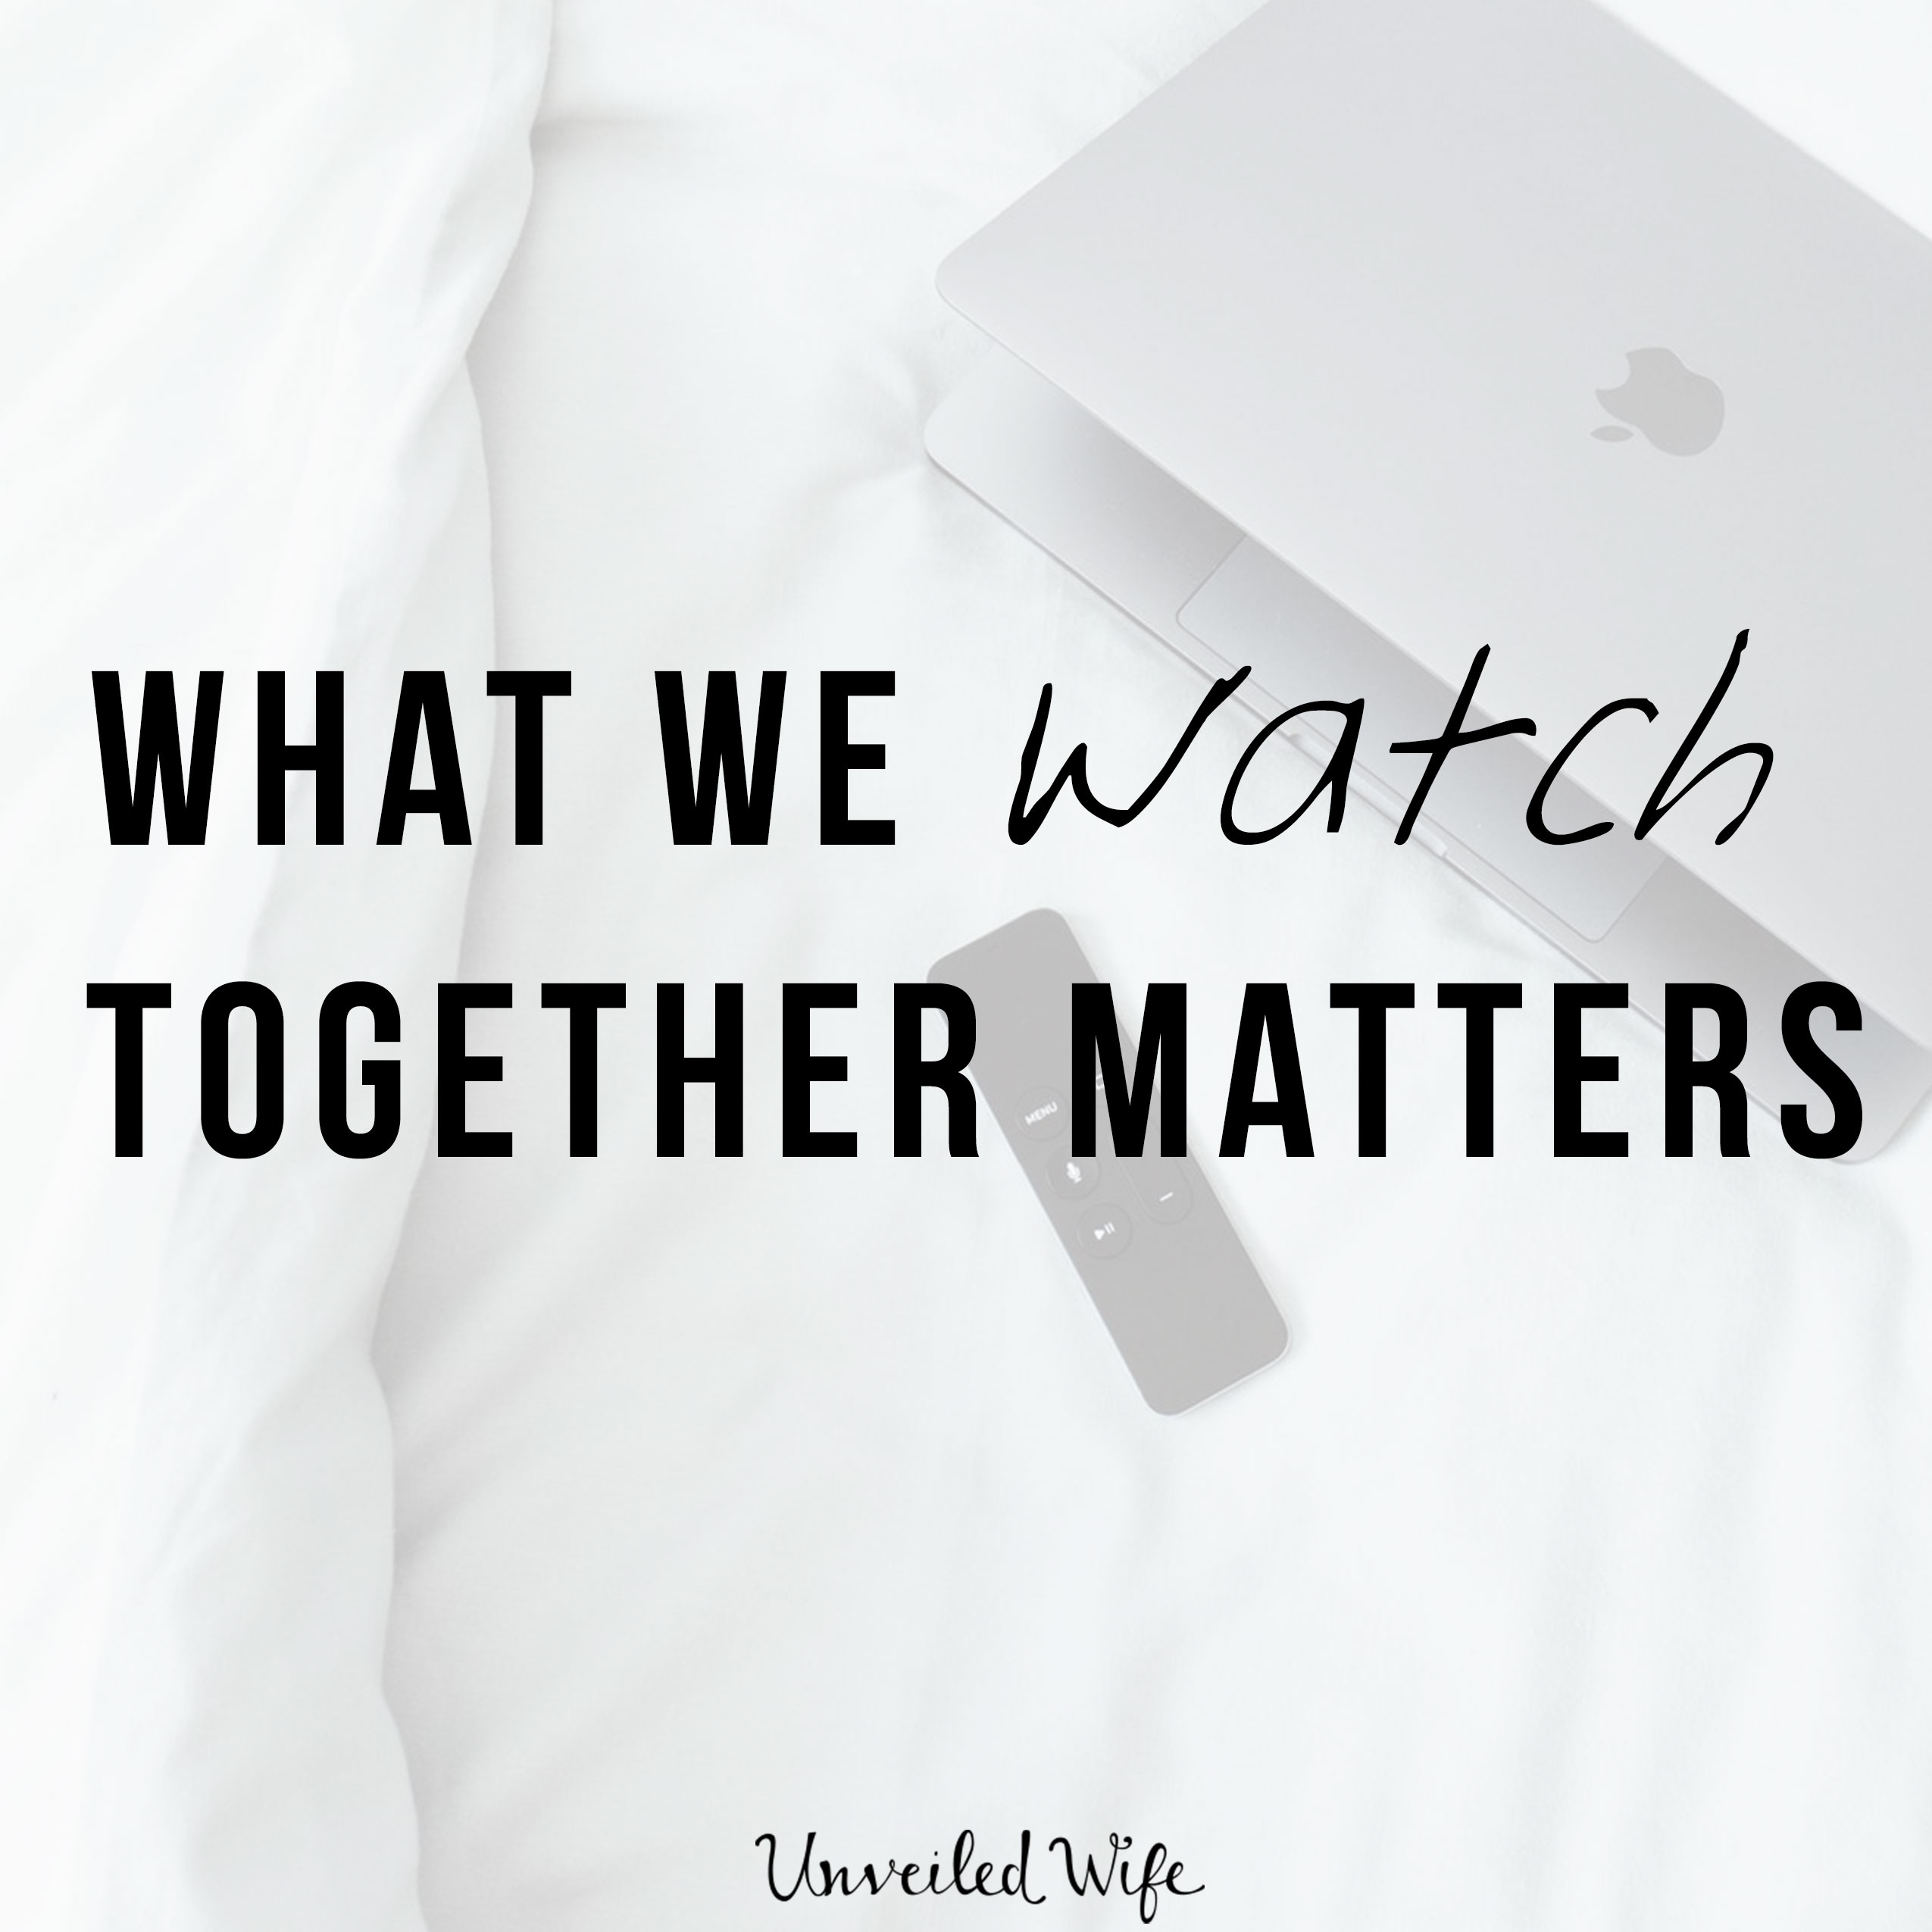 What We Watch Together Matters